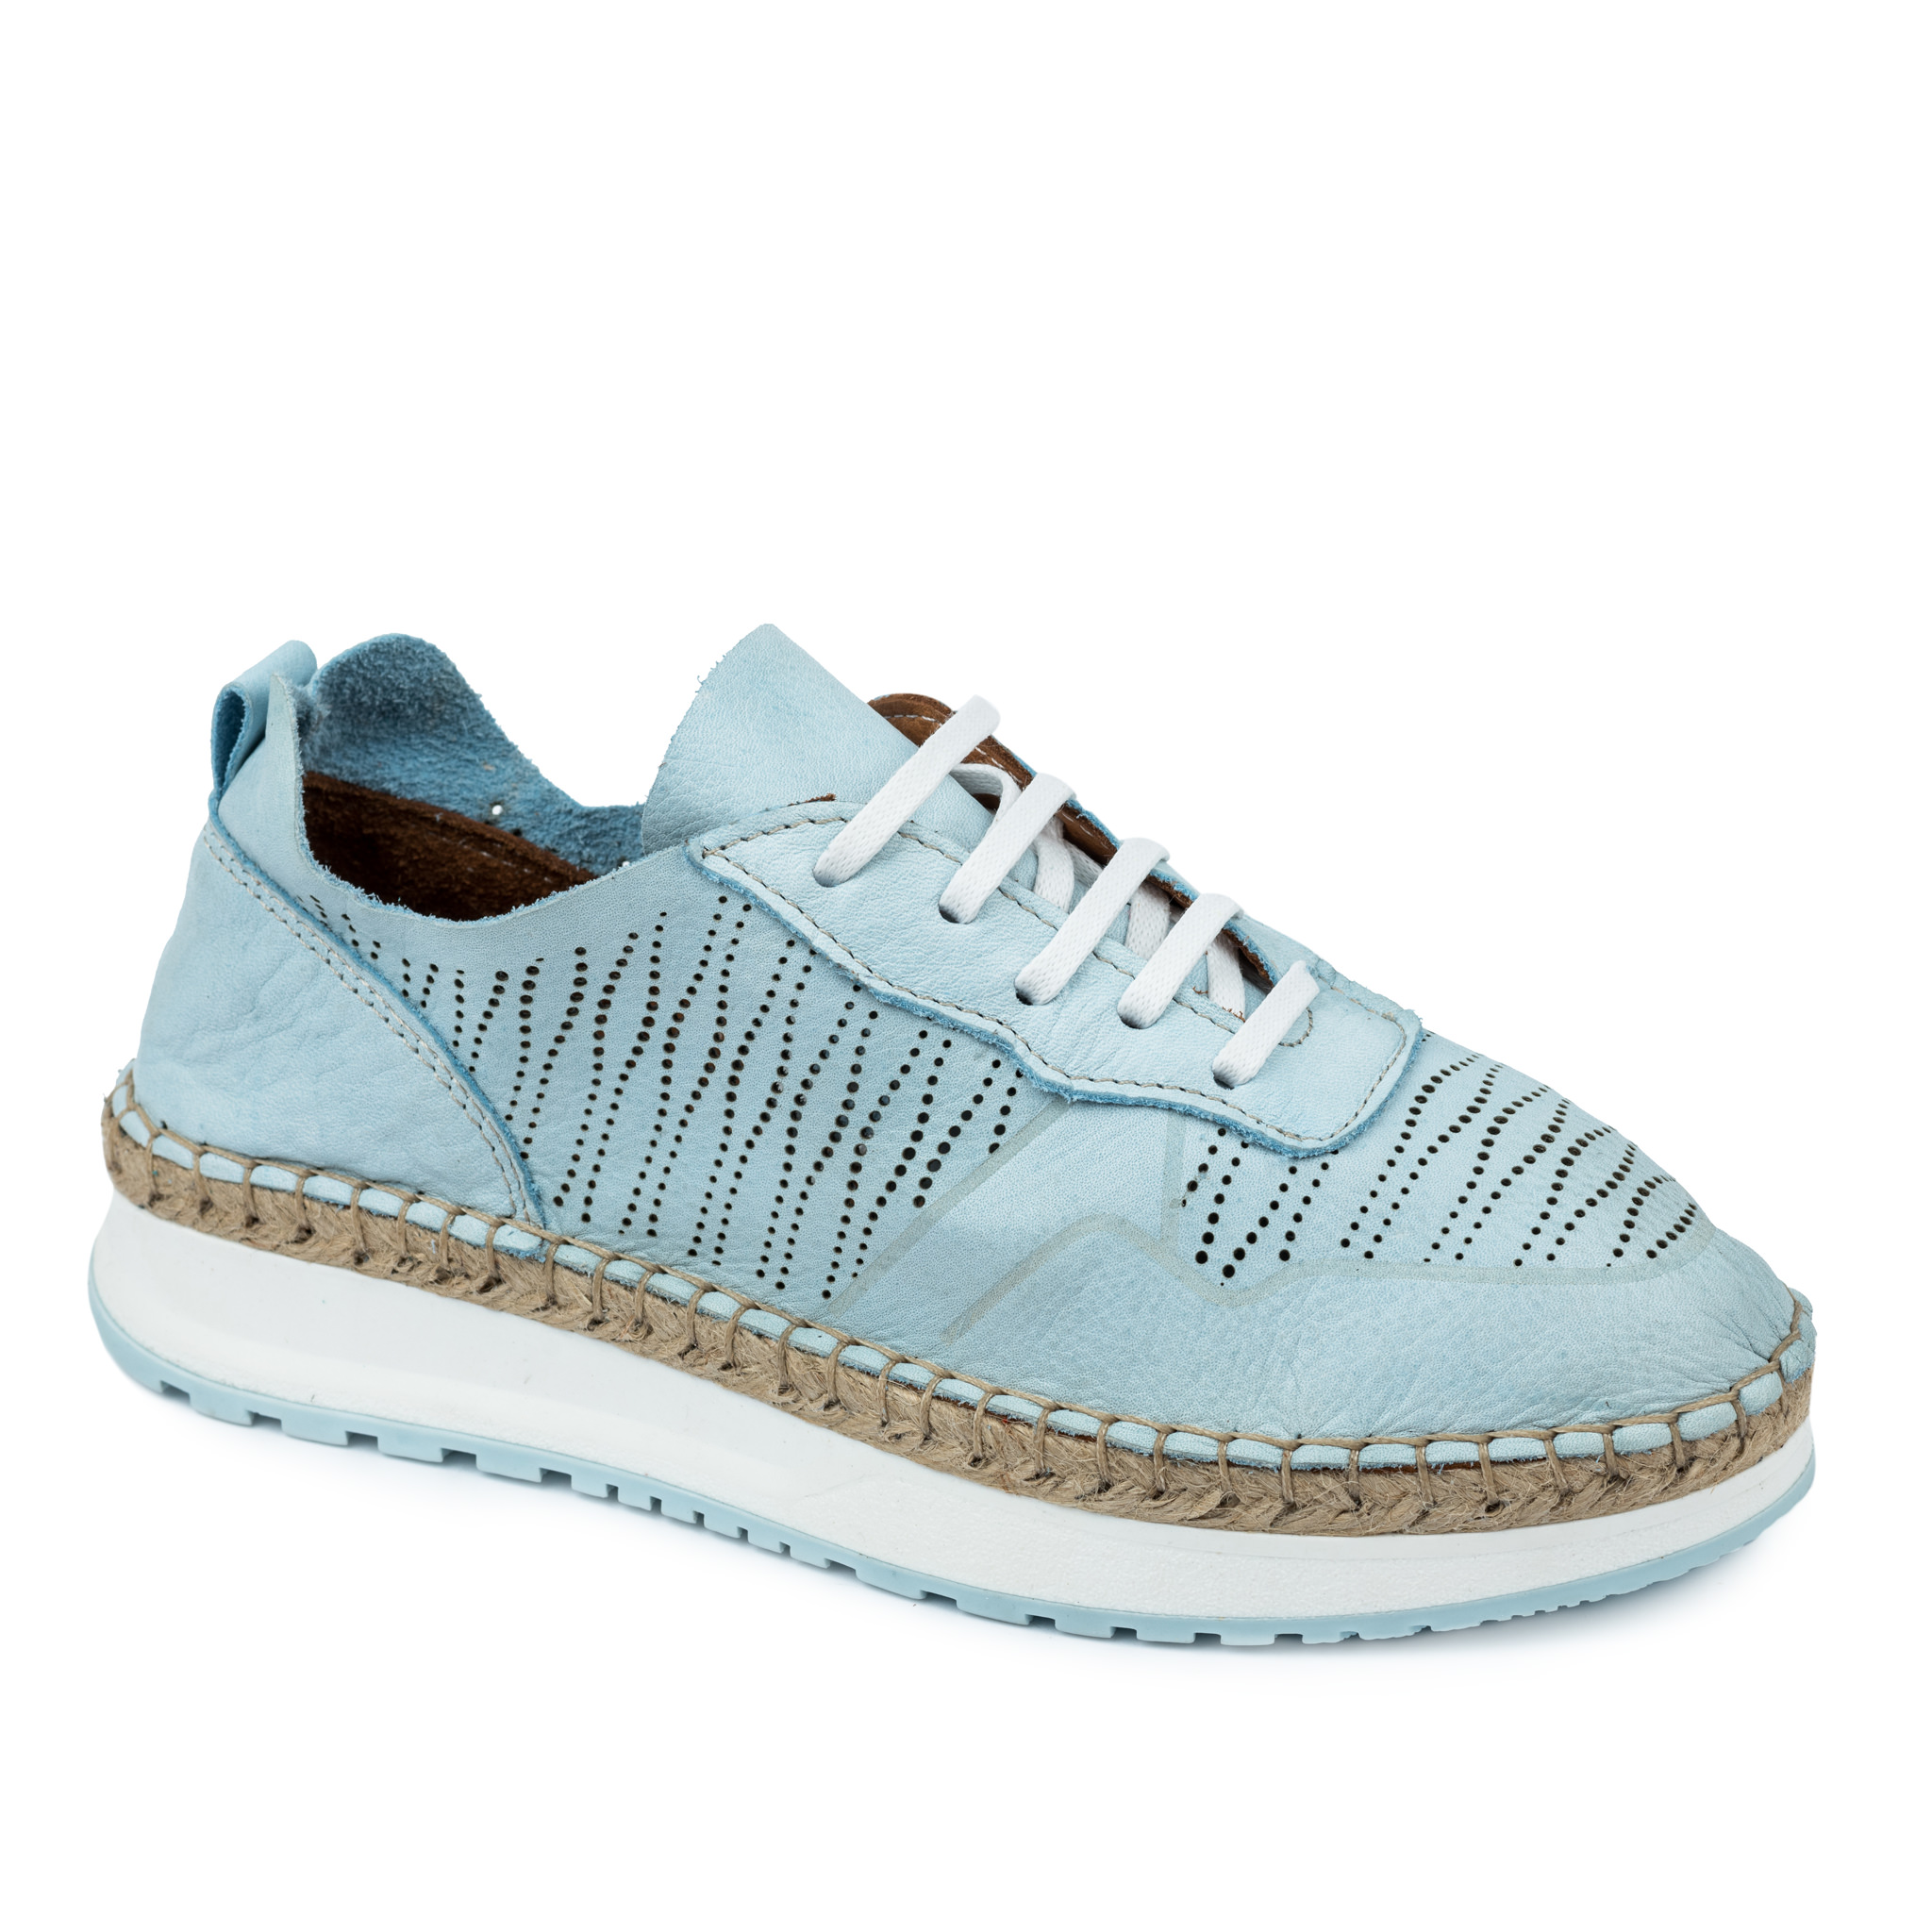 Leather sneakers A546 - BLUE